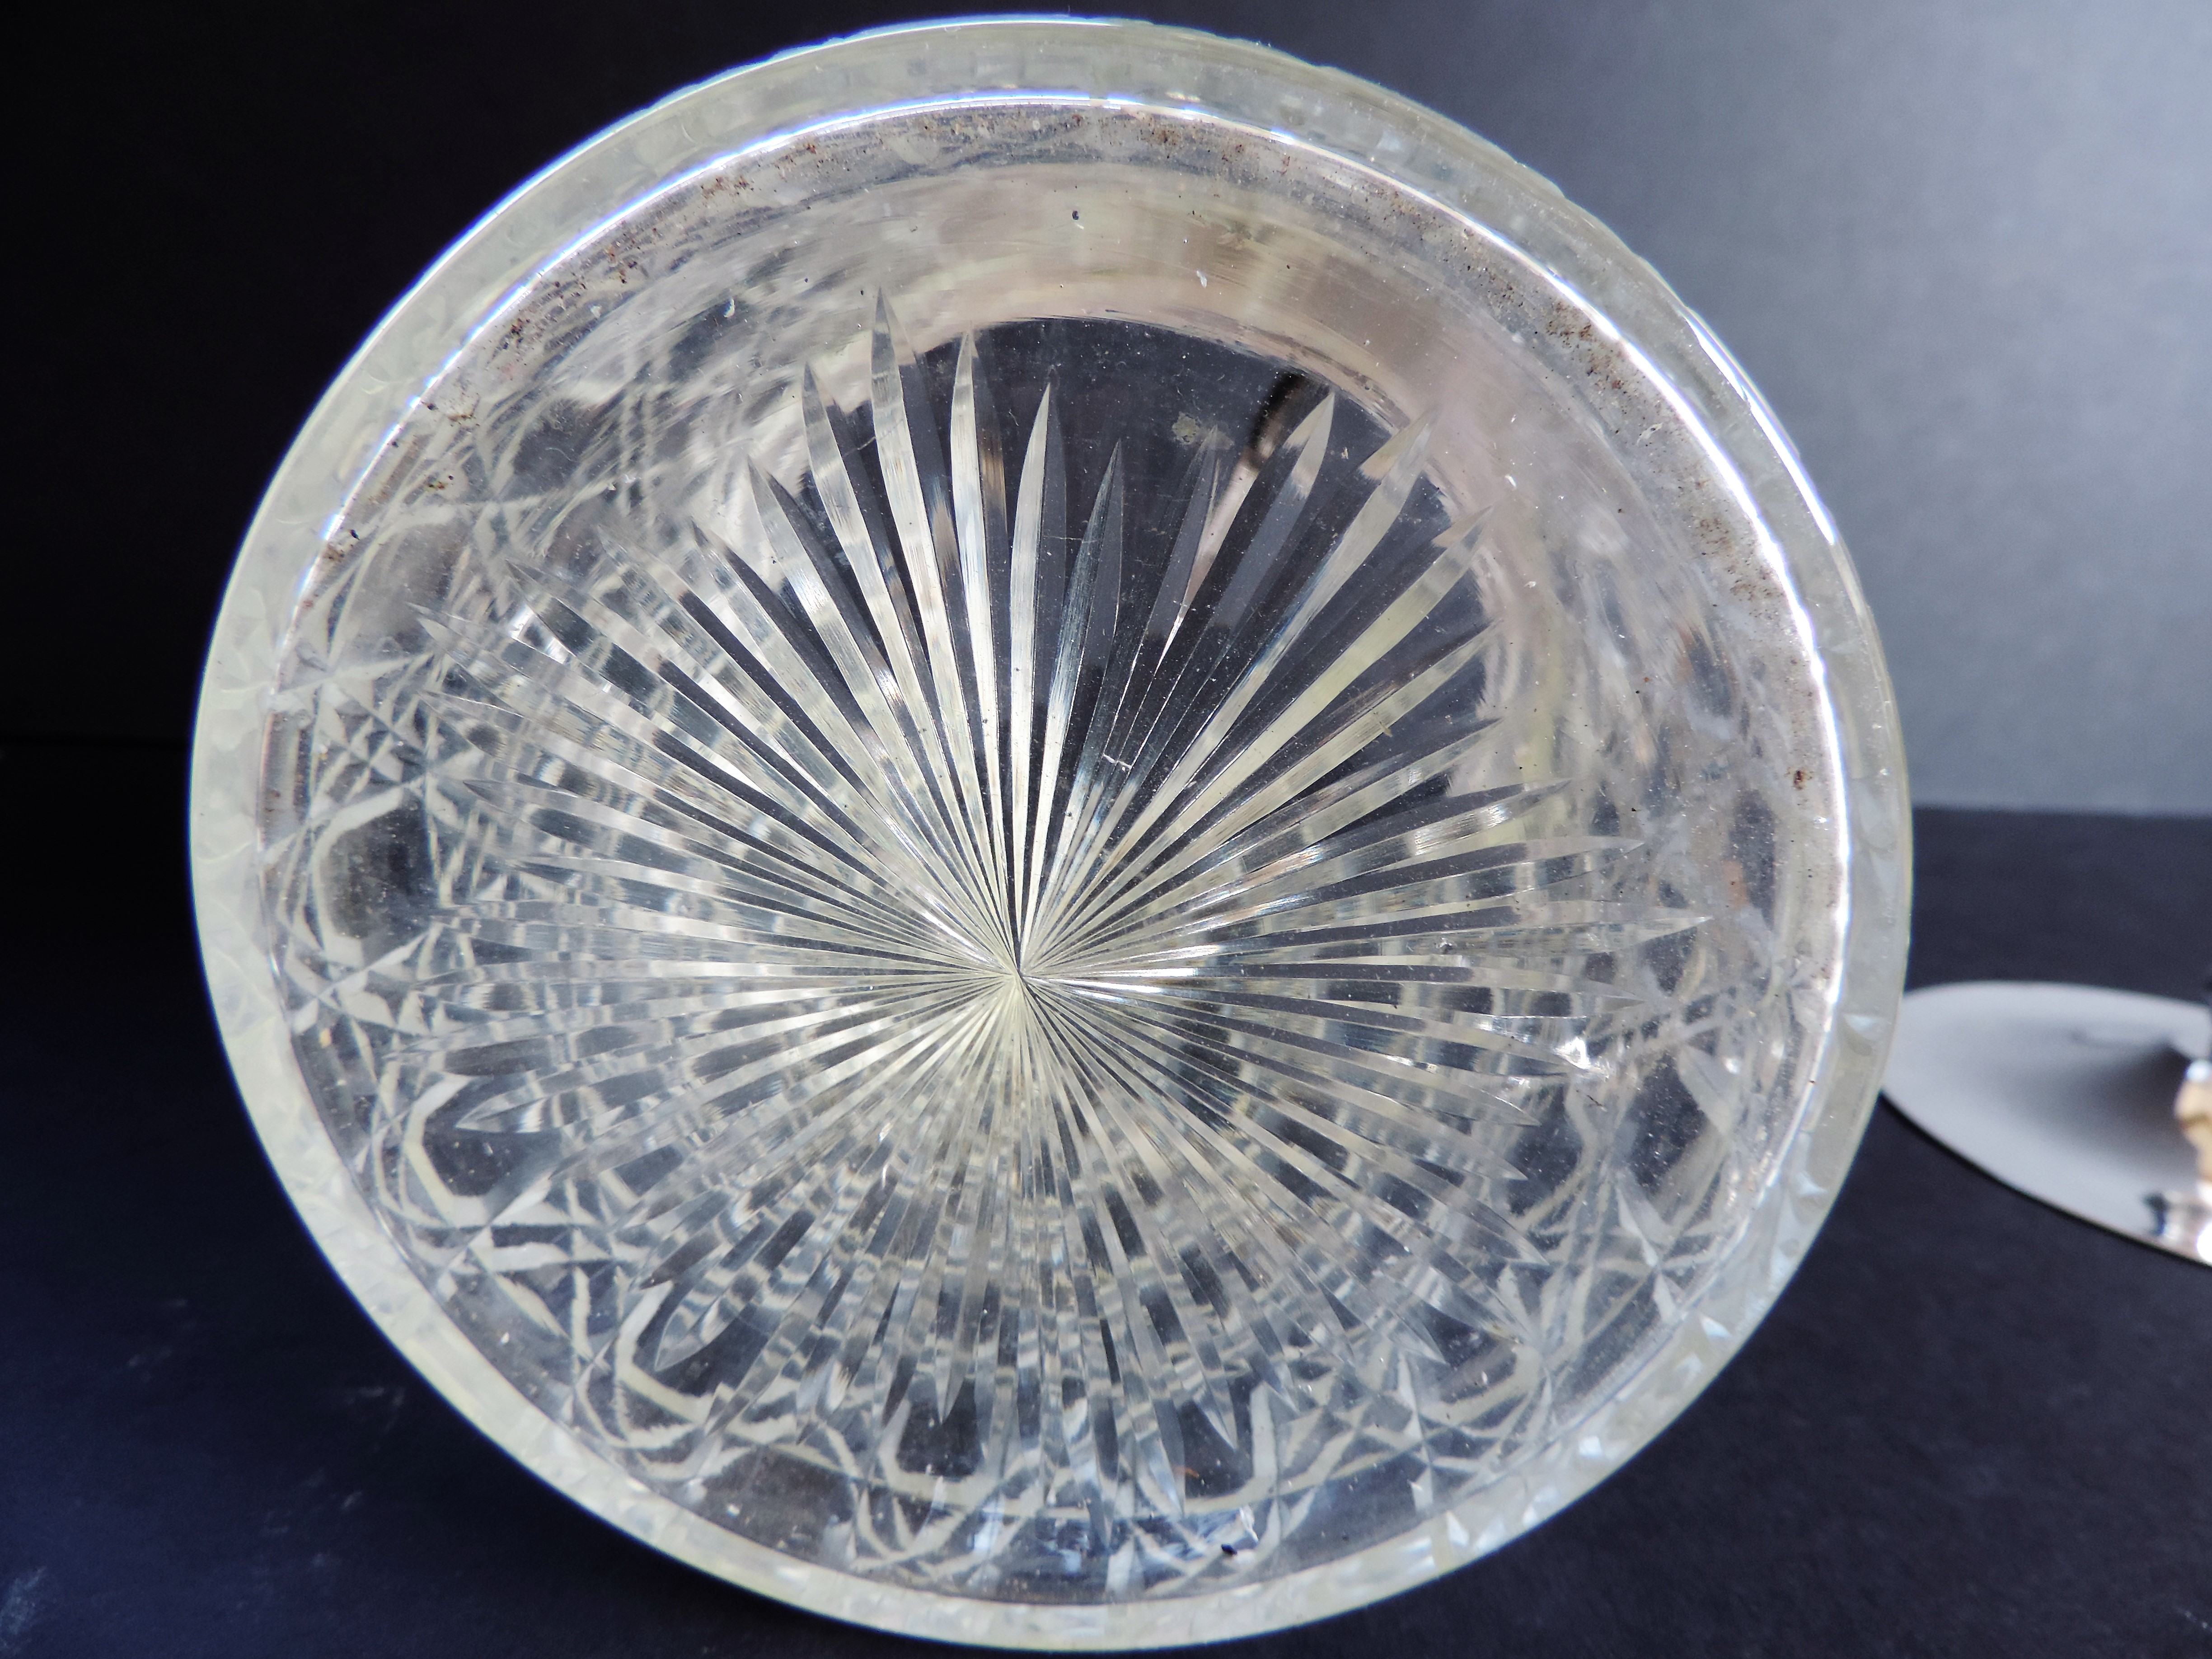 Vintage Cut Glass and Silver Plate Ice Bucket - Image 5 of 5